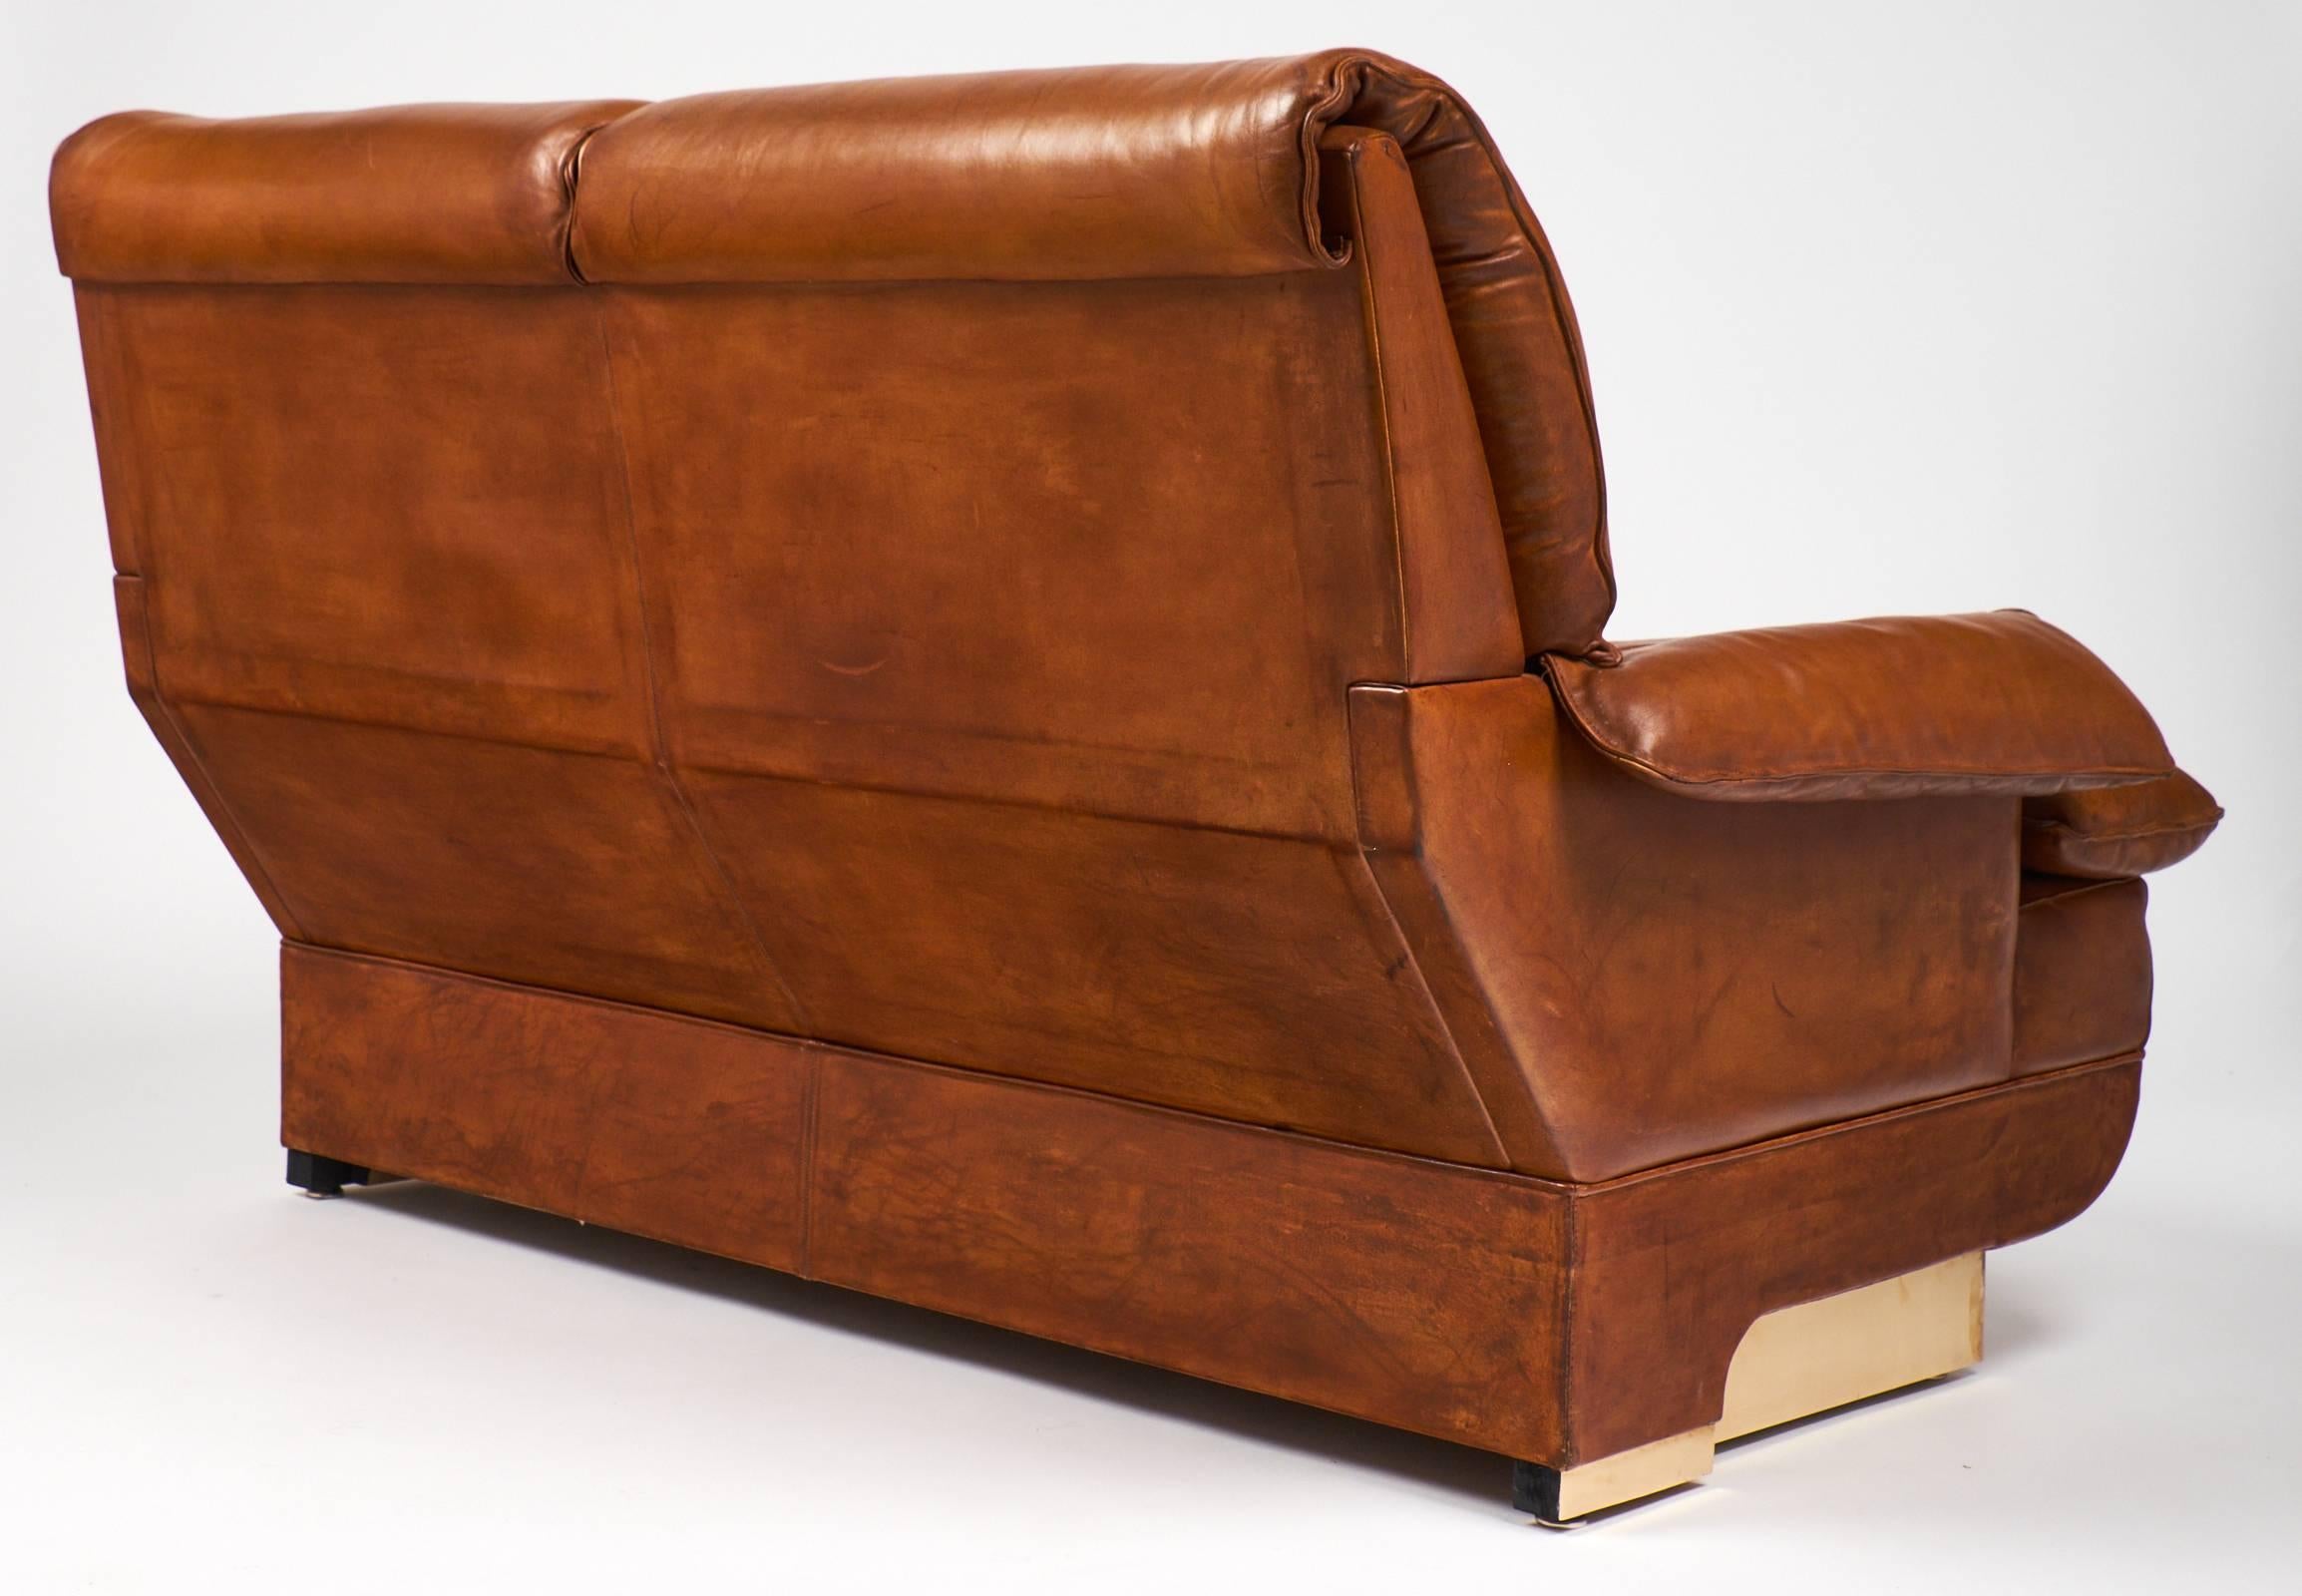 French Modernist Vintage Leather and Brass Sofa 1